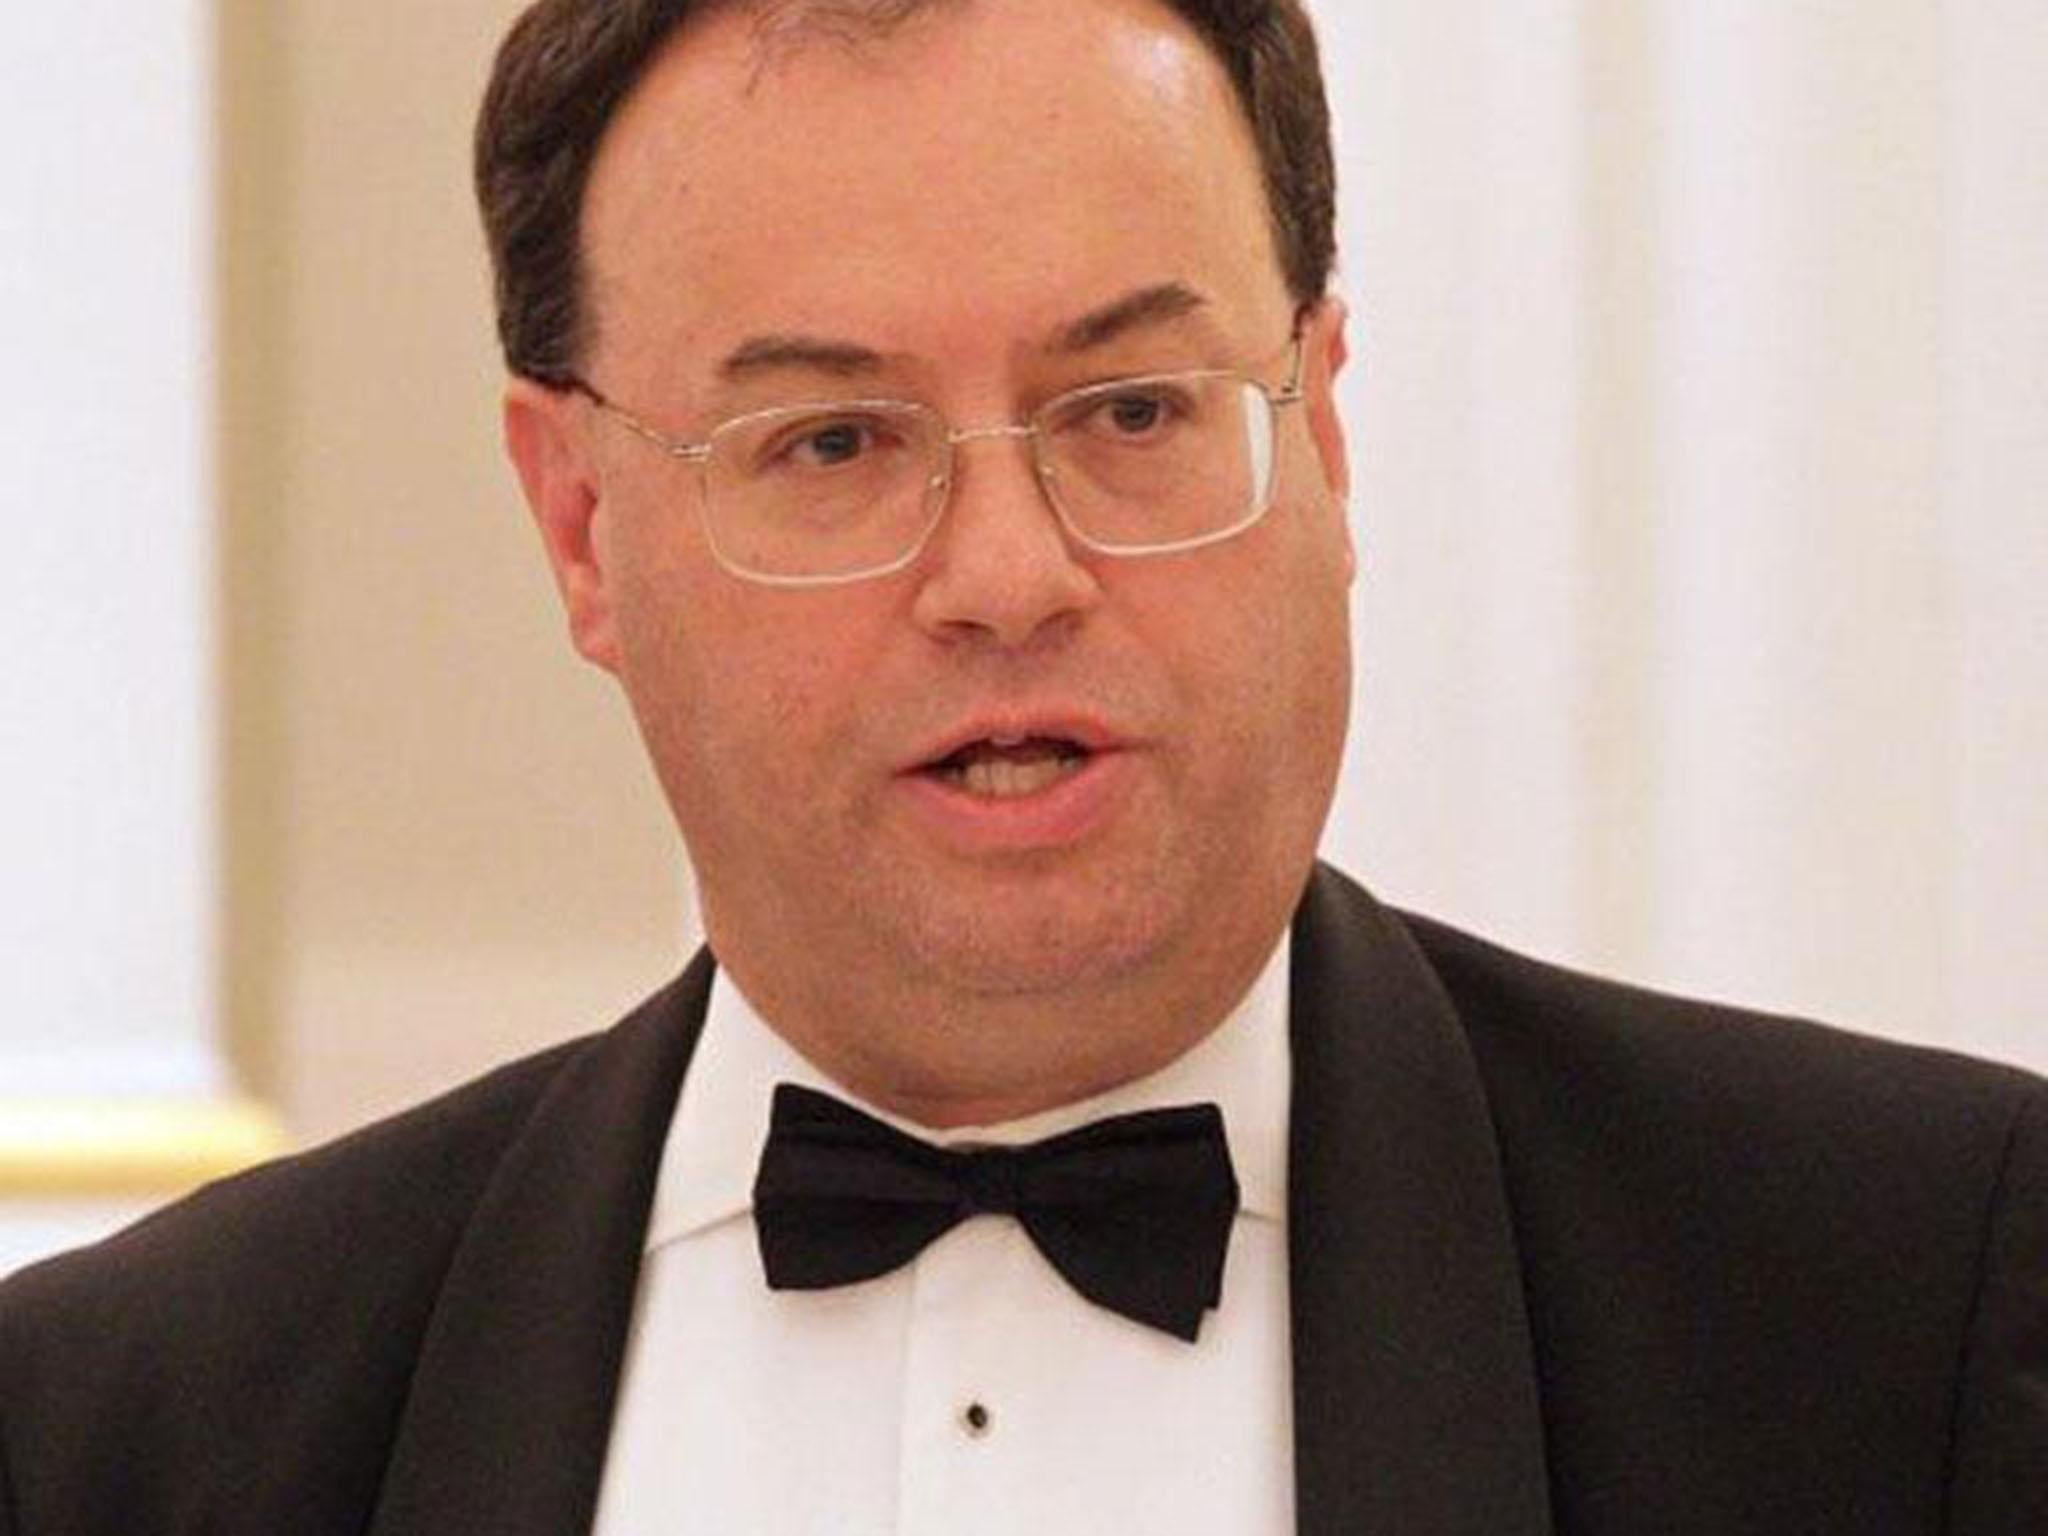 Andrew Bailey, chief executive of the Financial Conduct Authority, is consulting on the watchdog's role